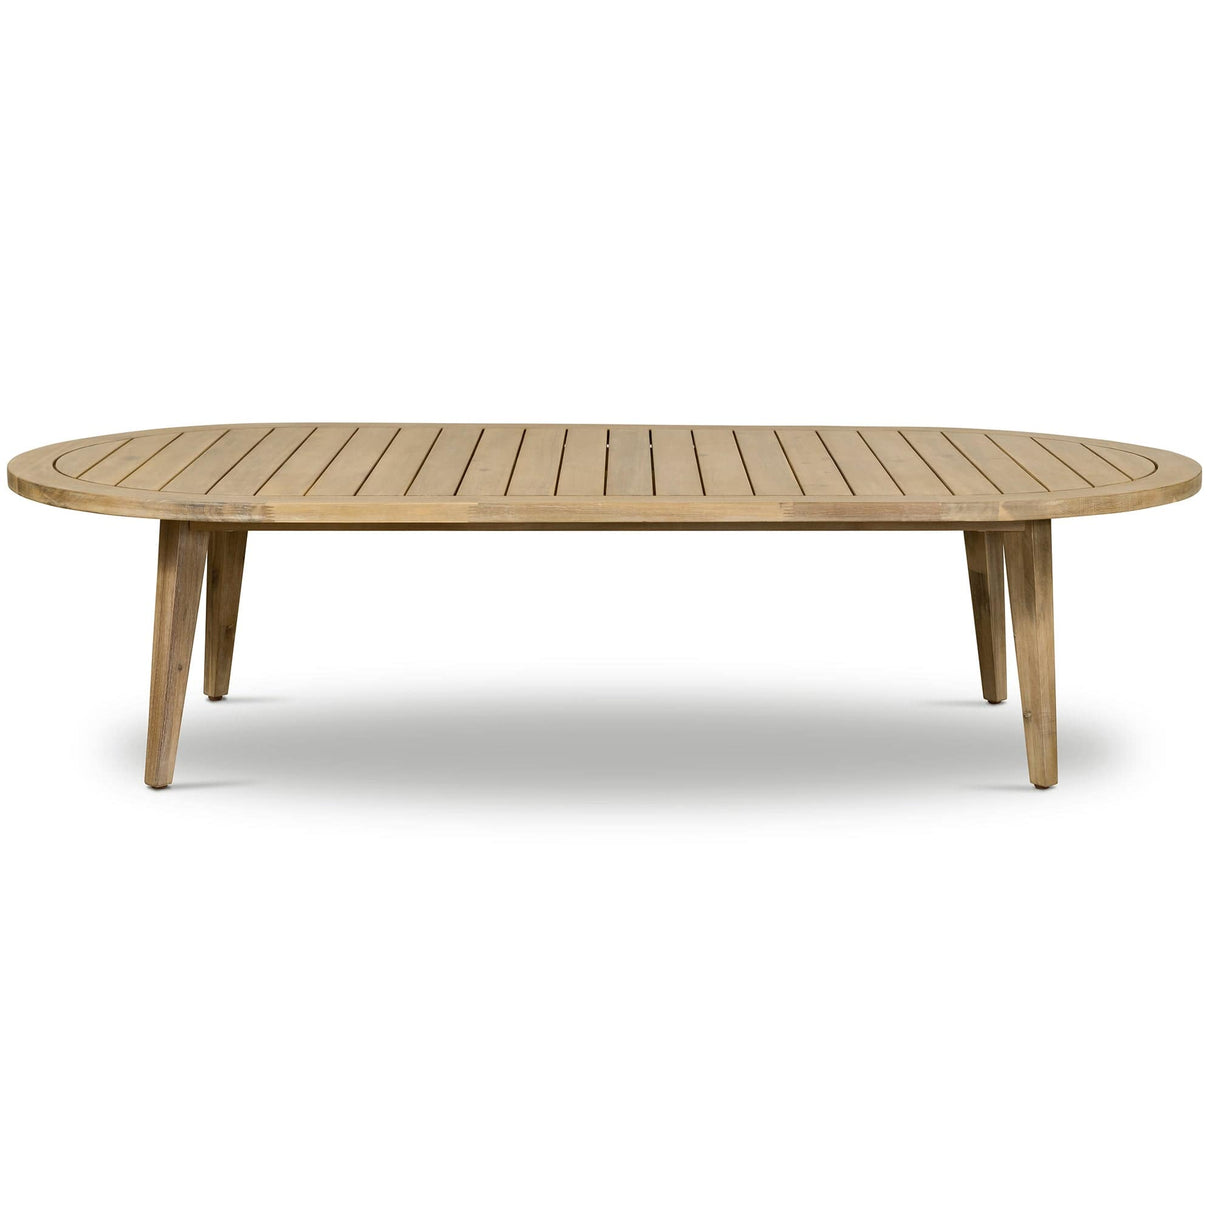 Four Hands Amaya Outdoor Coffee Table Outdoor Furniture four-hands-232271-001 801542903091